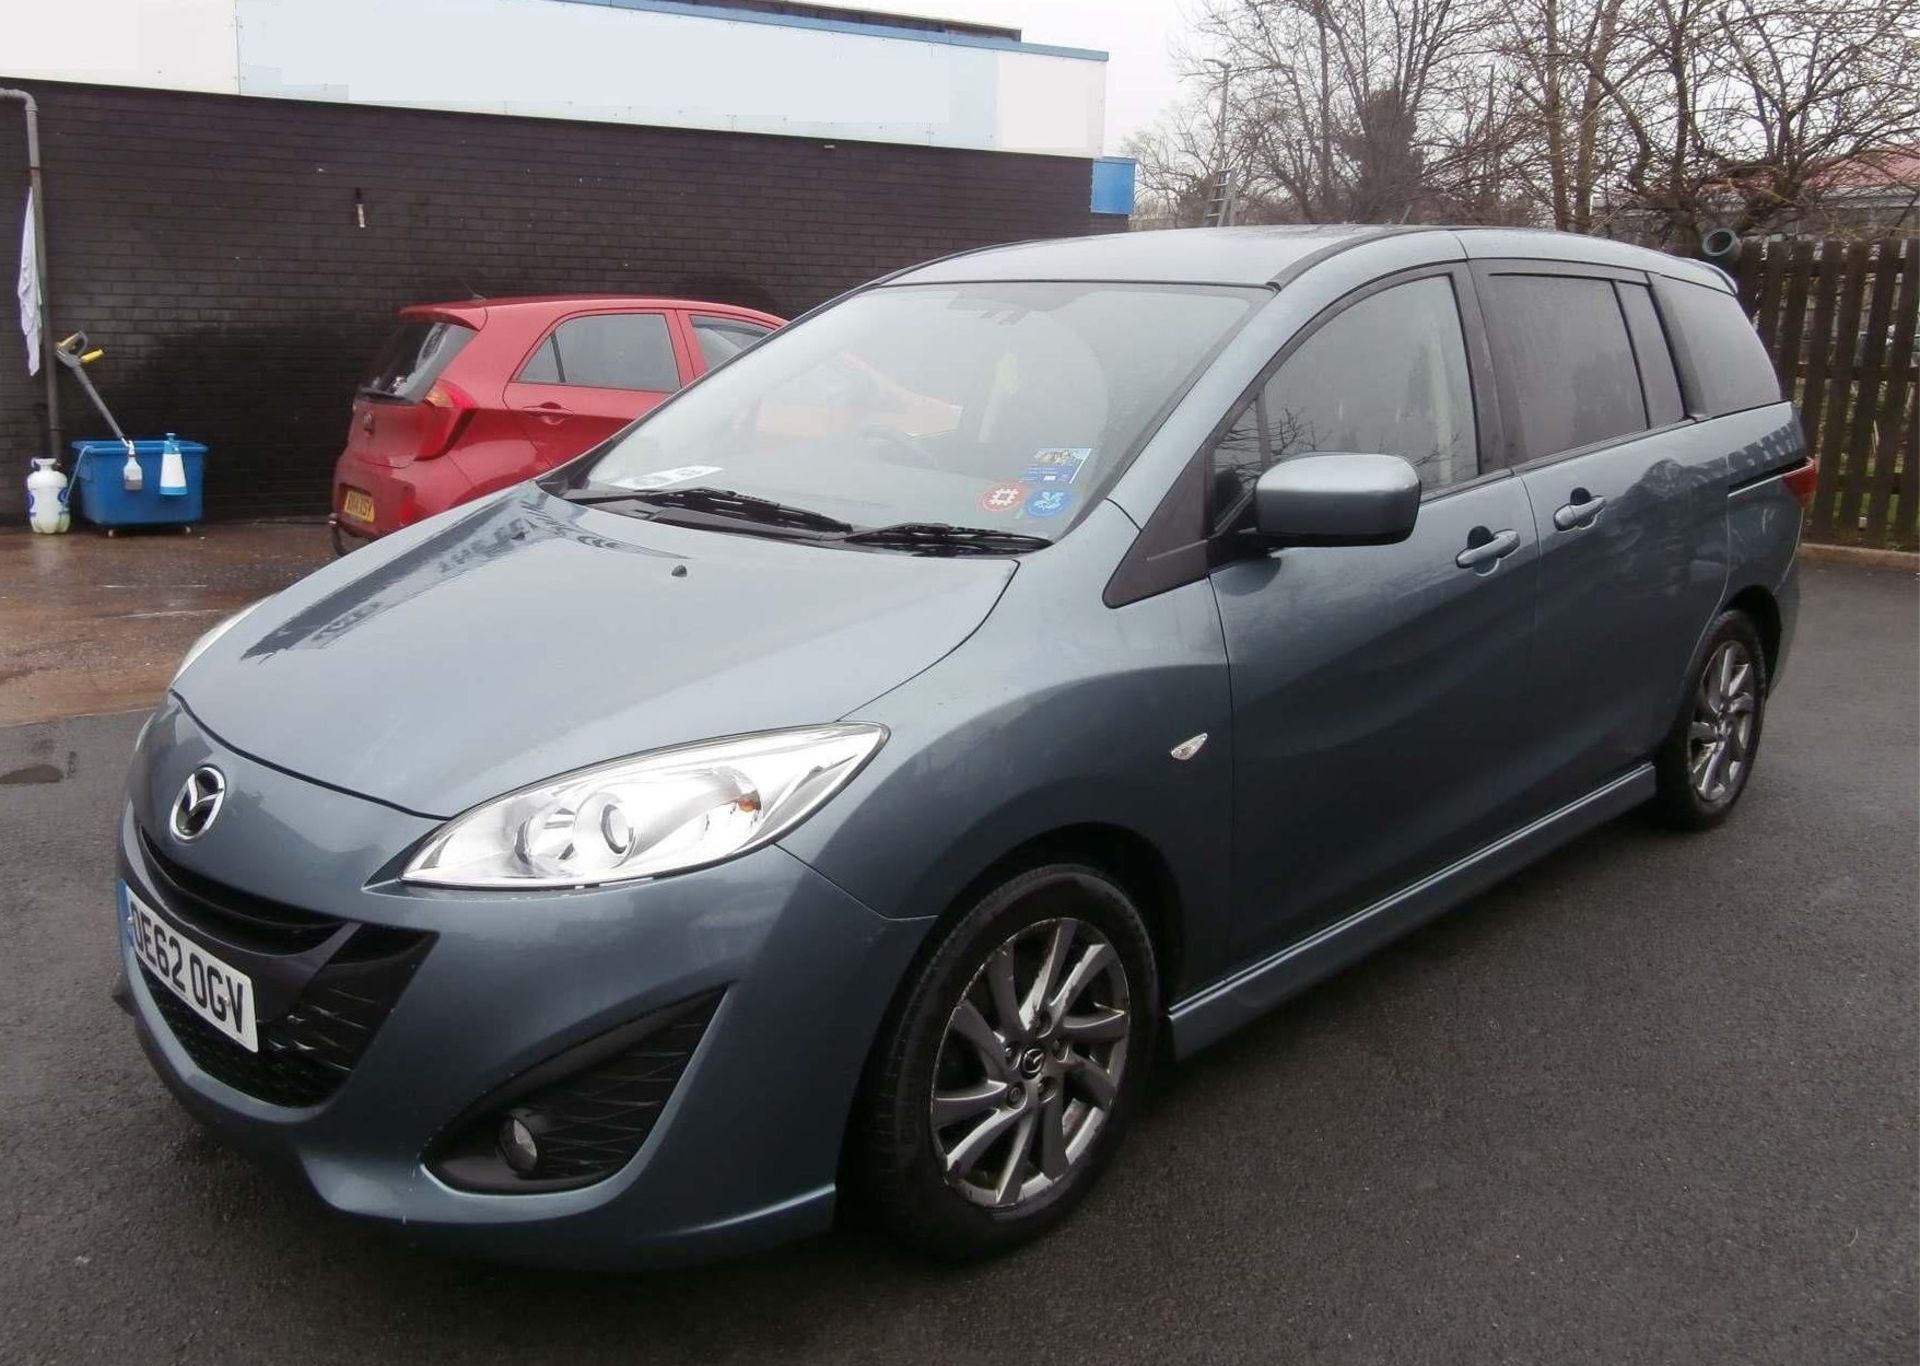 2013 Mazda 5 2.0 Venture Edition 5 Dr MPV - CL505 - NO VAT ON THE HAMMER - Location: Corby, N